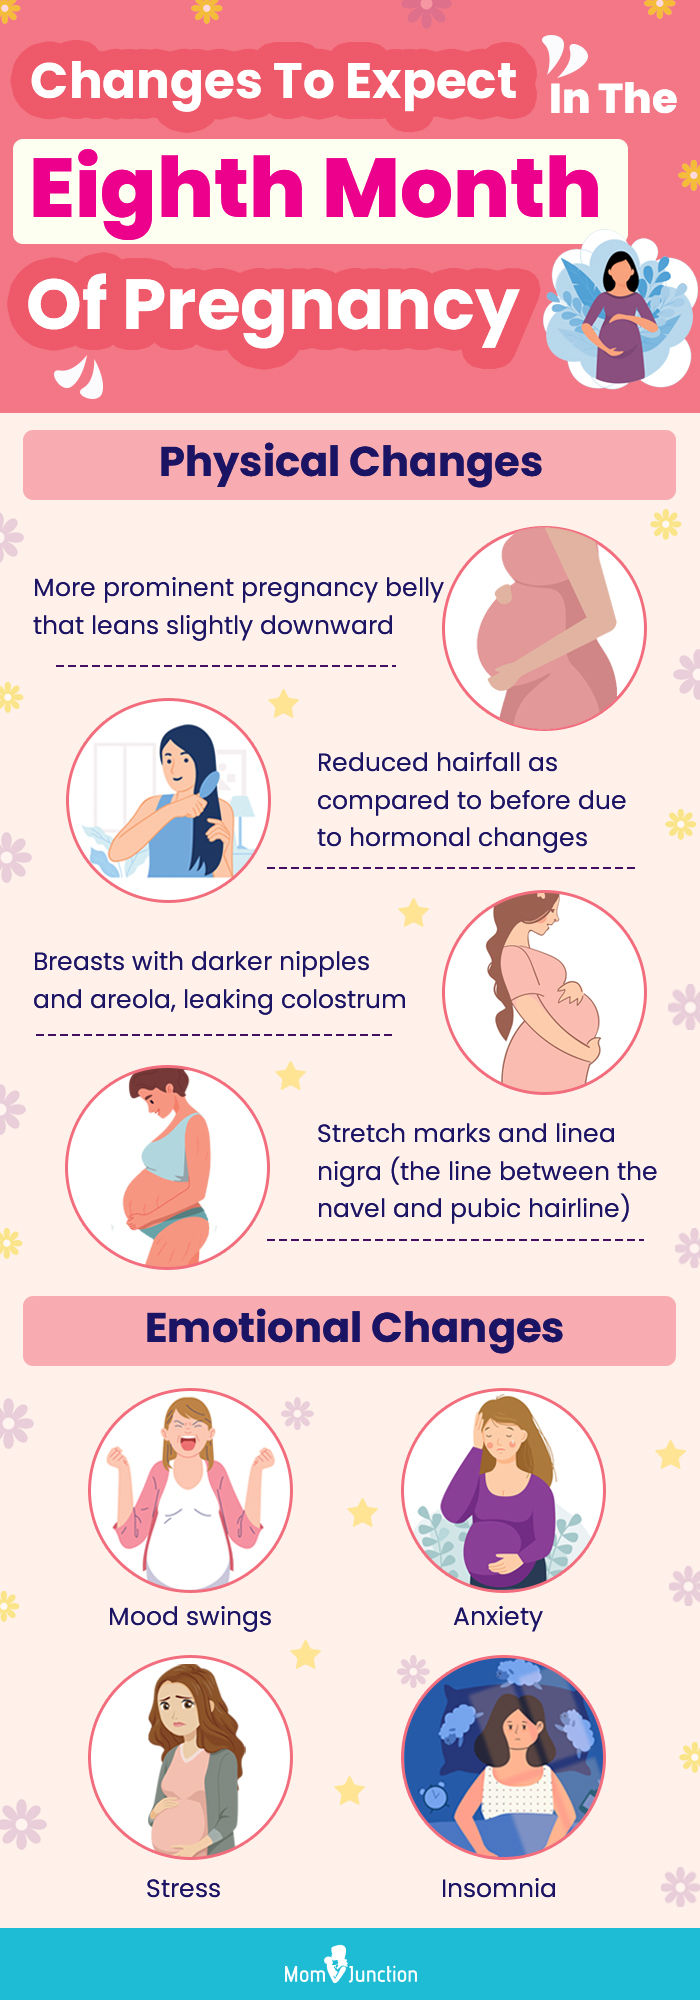 changes to expect in the eight month of pregnancy (infographic)